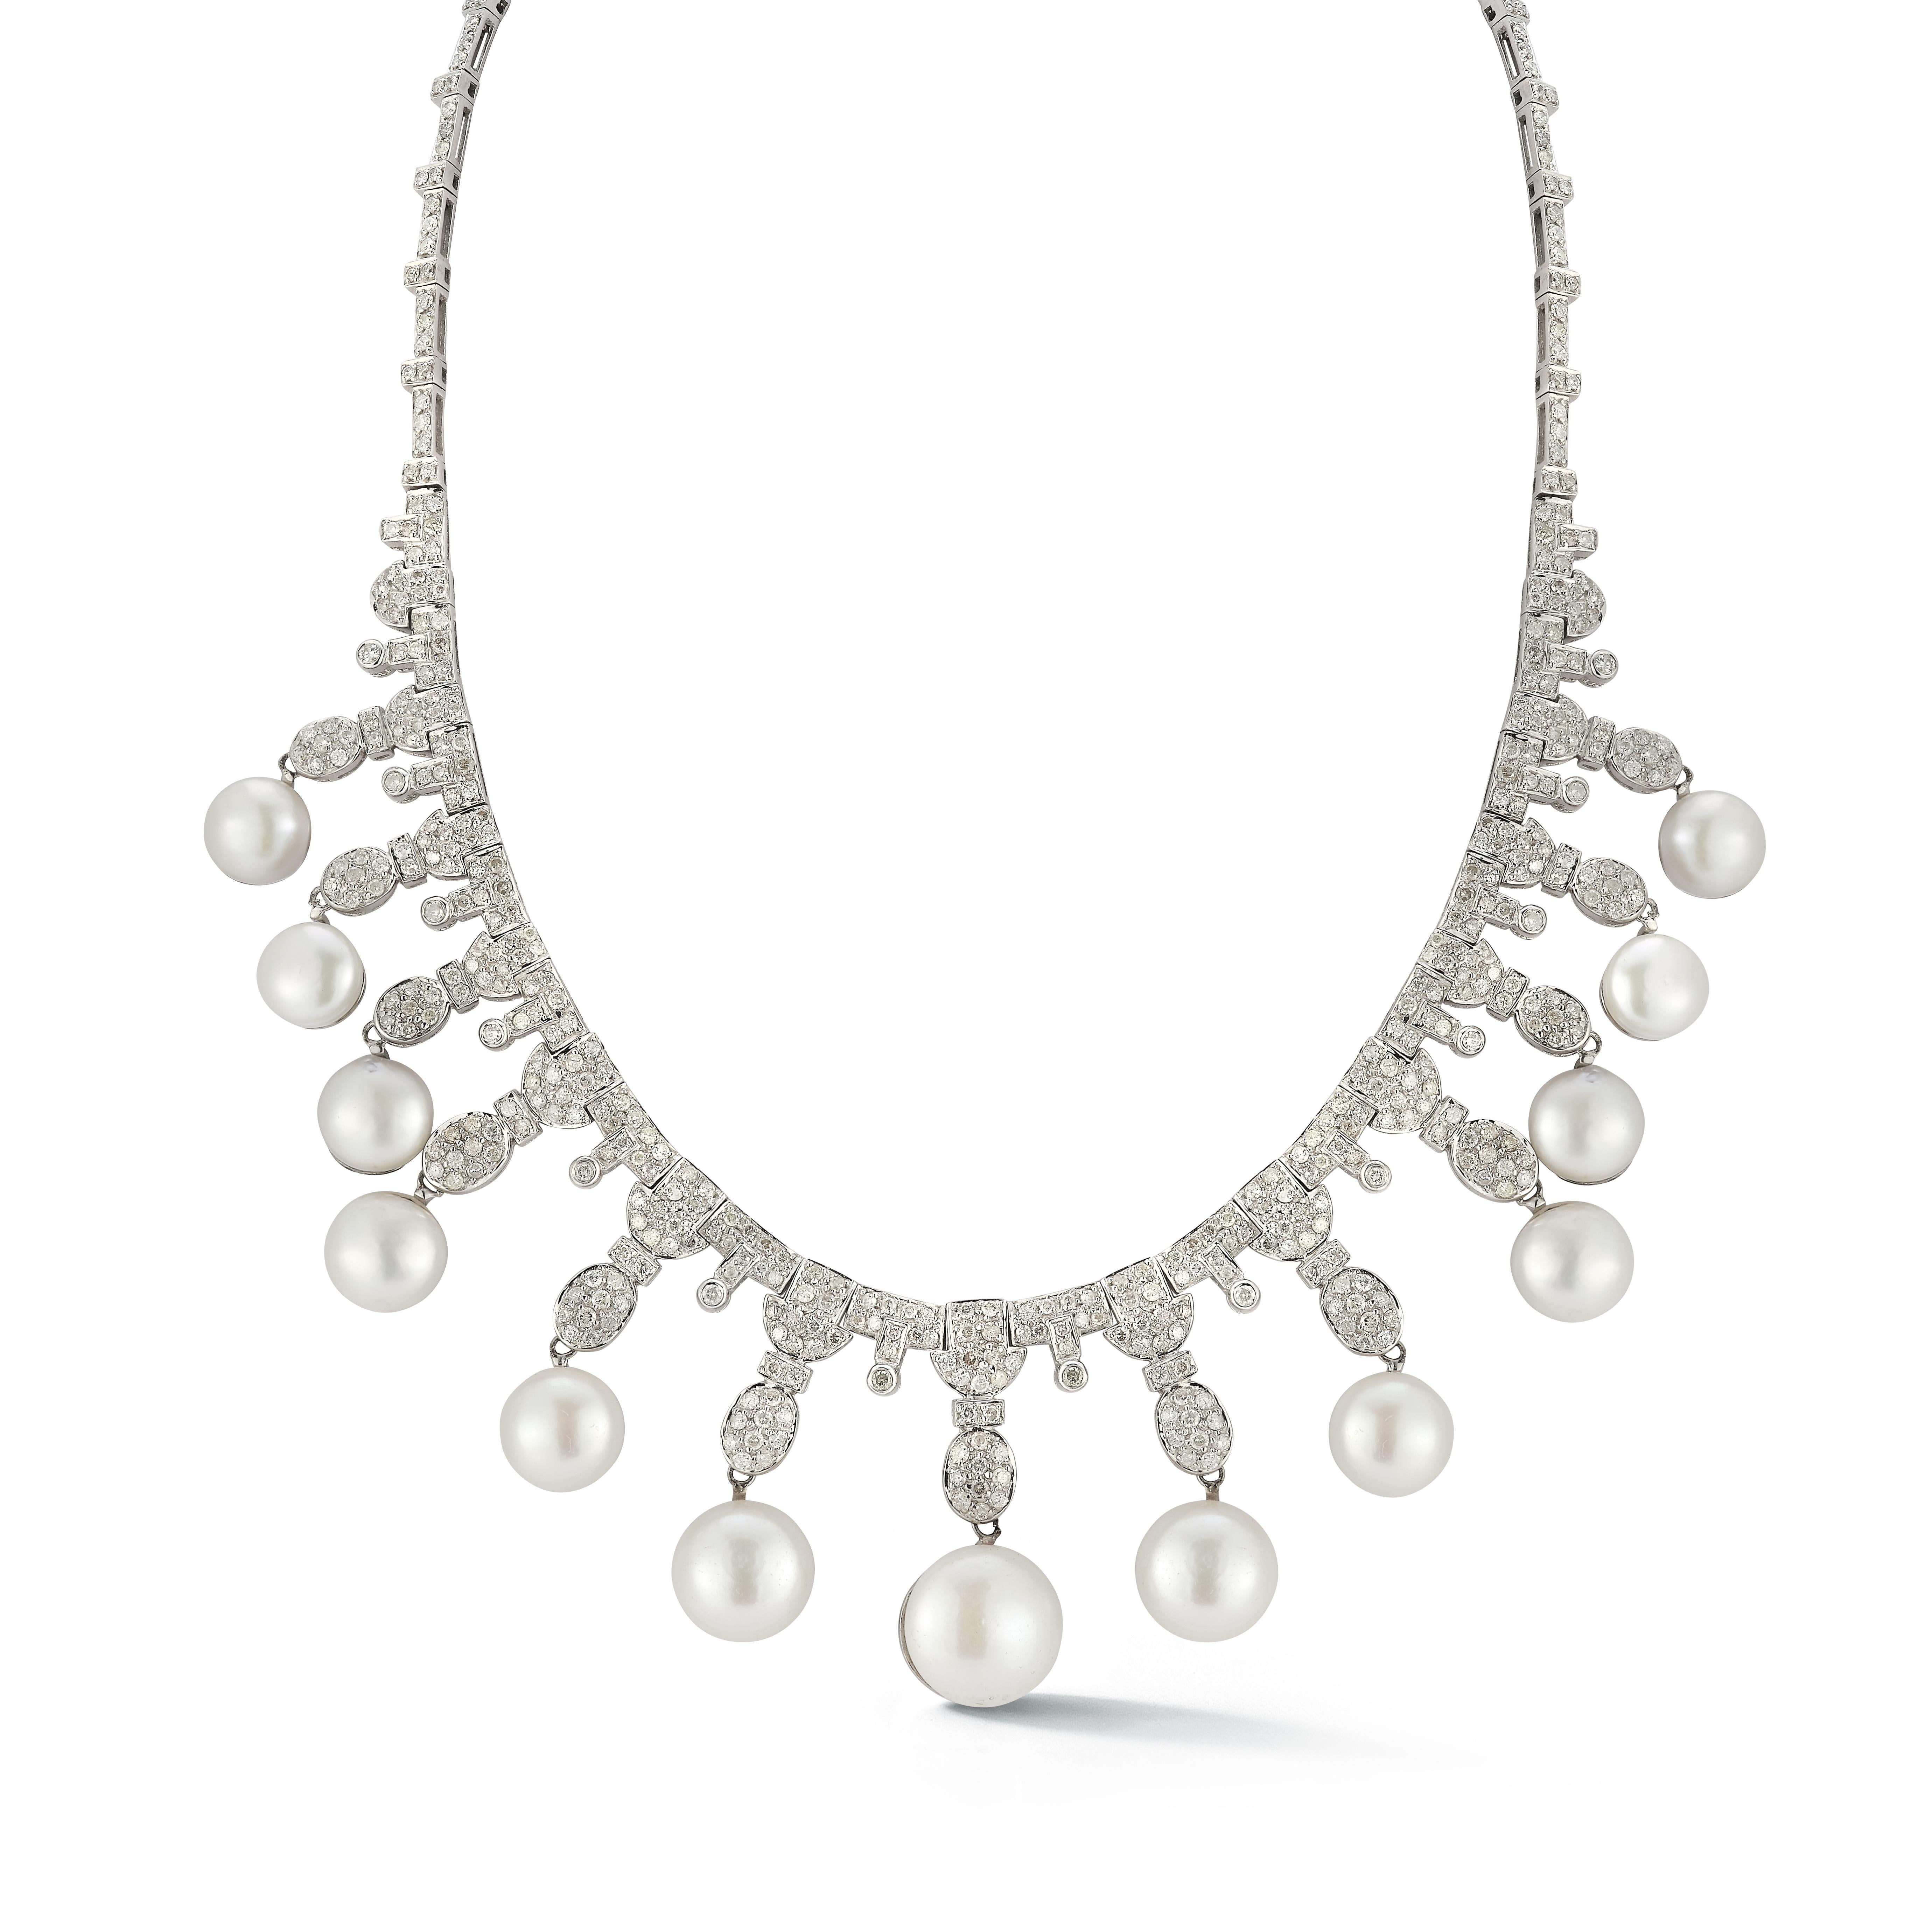 Pearl and Diamond Necklace

An 18 karat white gold necklace set with 13 pearls and round diamonds weighing approximately 11 carats

Length: 16